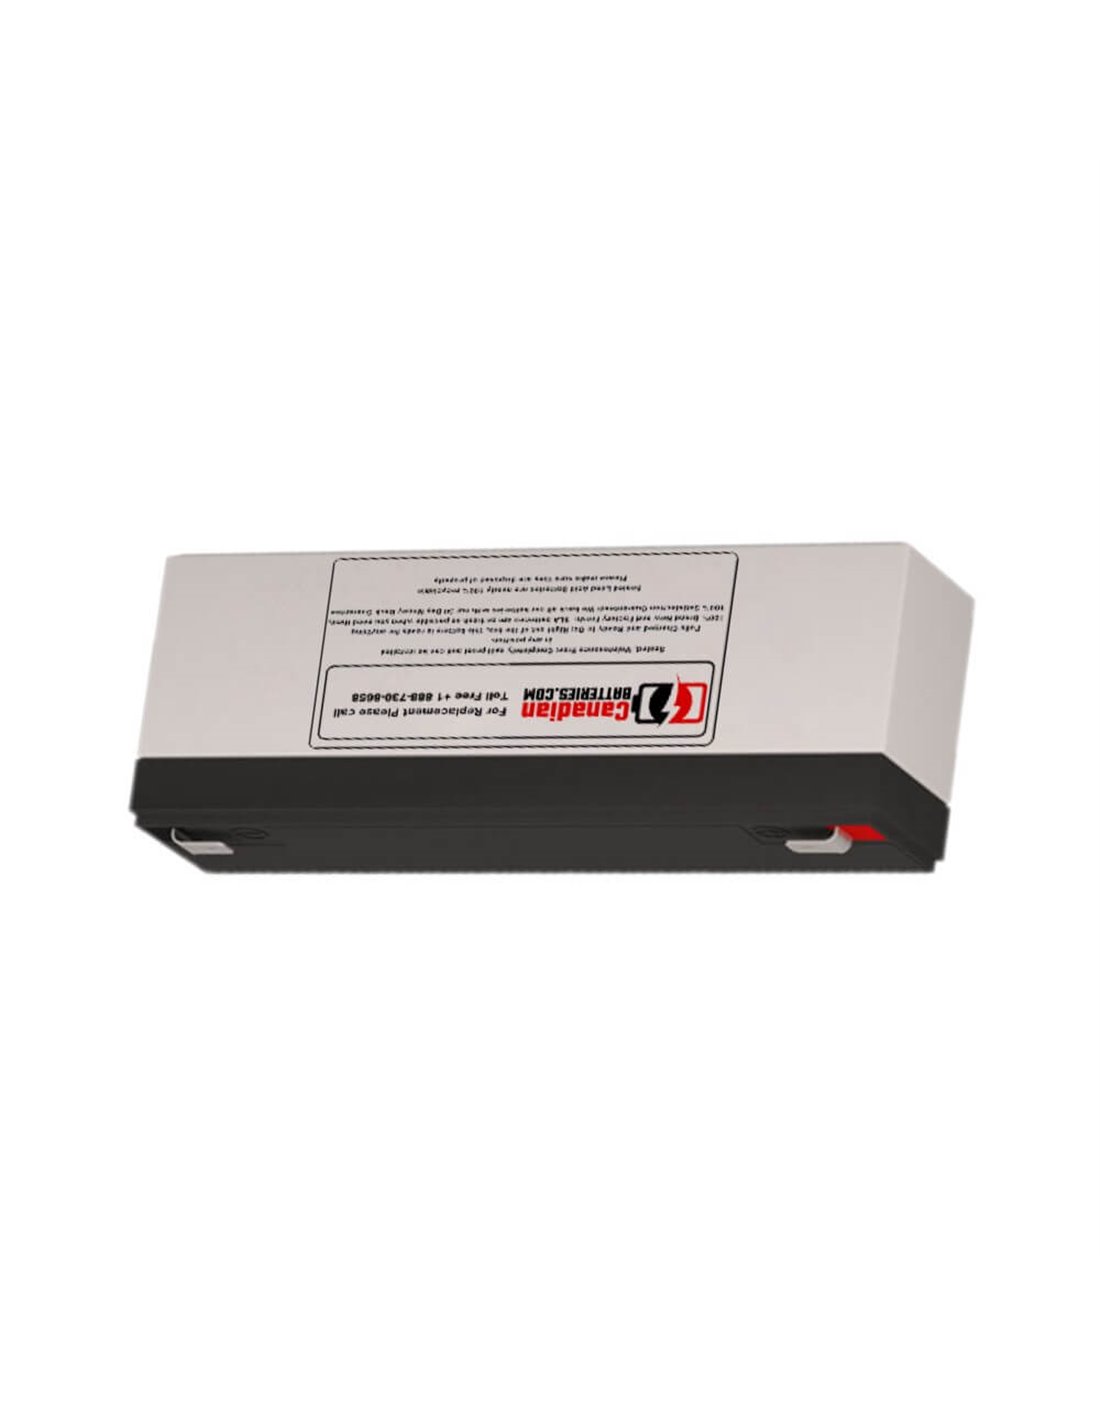 Battery for Intellipower Tteries Pc1220 UPS, 1 x 12V, 2.3Ah - 27.6Wh